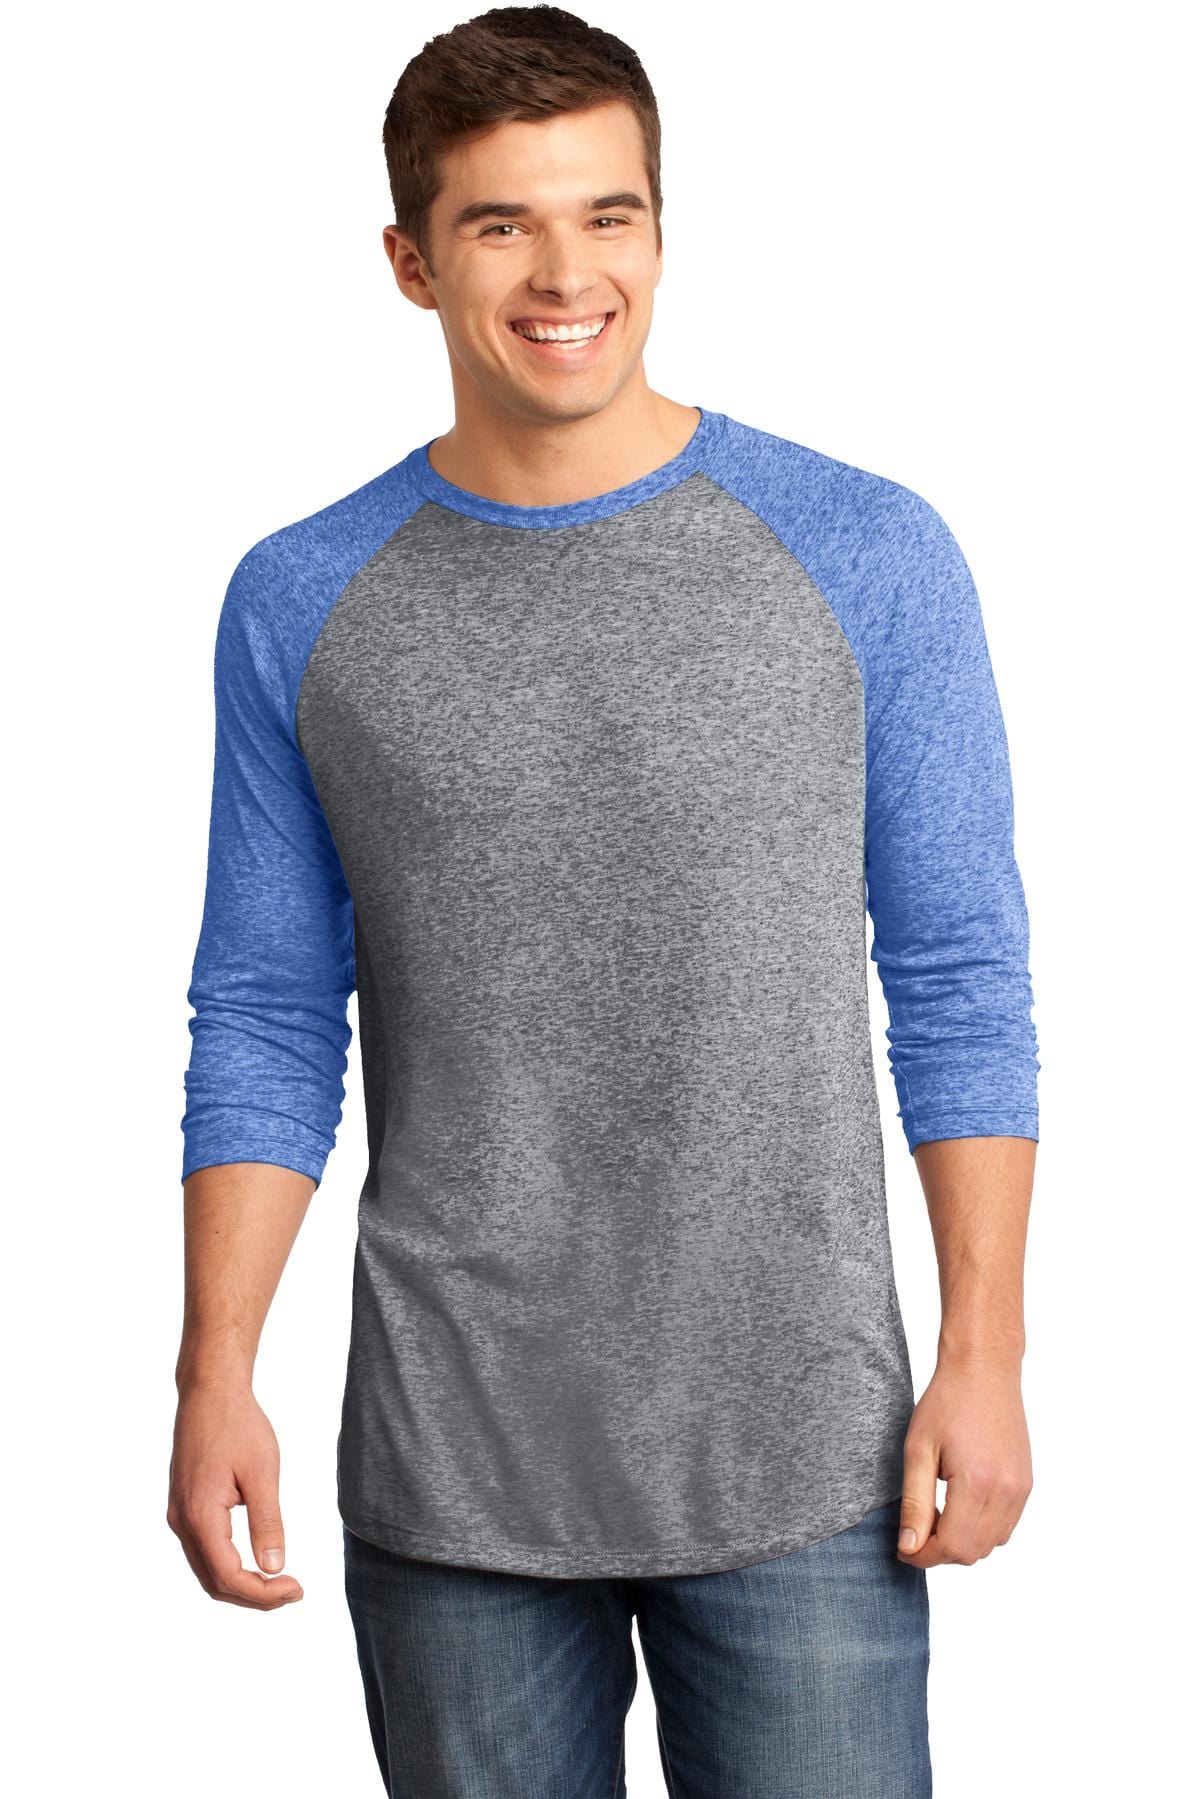 DISCONTINUED  District ®  - Young Mens Microburn ®  3/4-Sleeve Raglan Tee. DT162